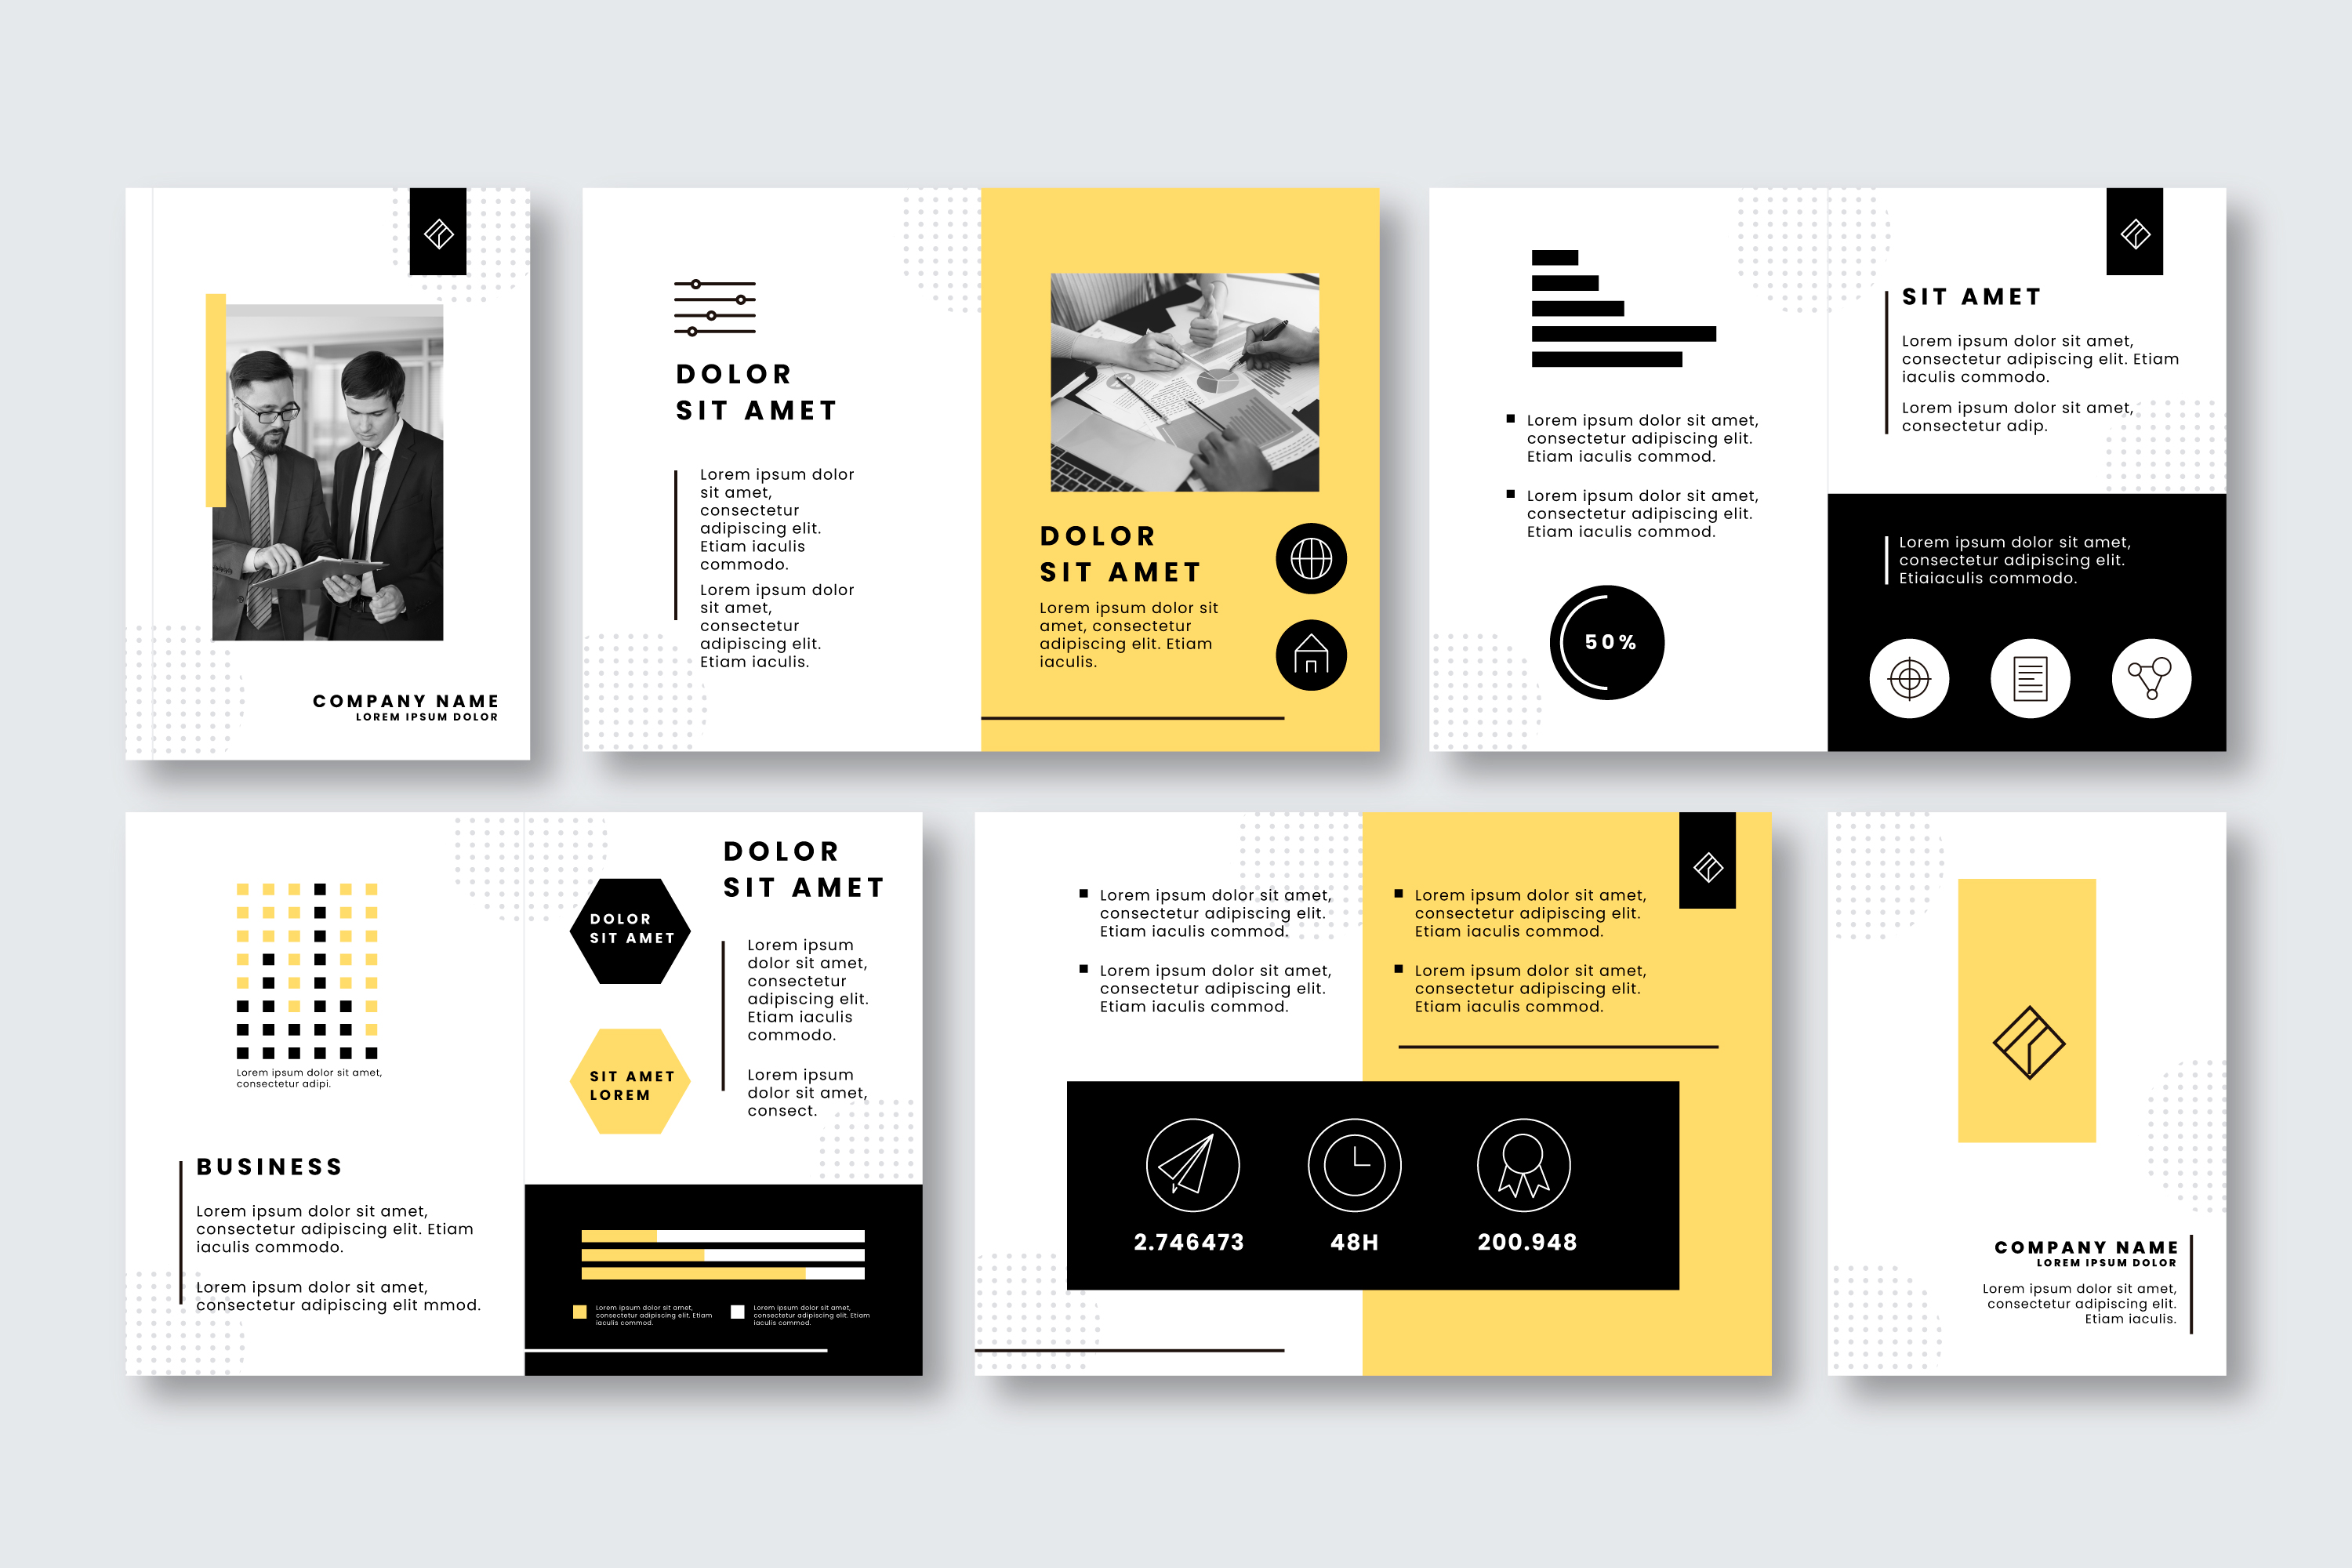 Designing a Winning Brochure: Tips and Best Practices